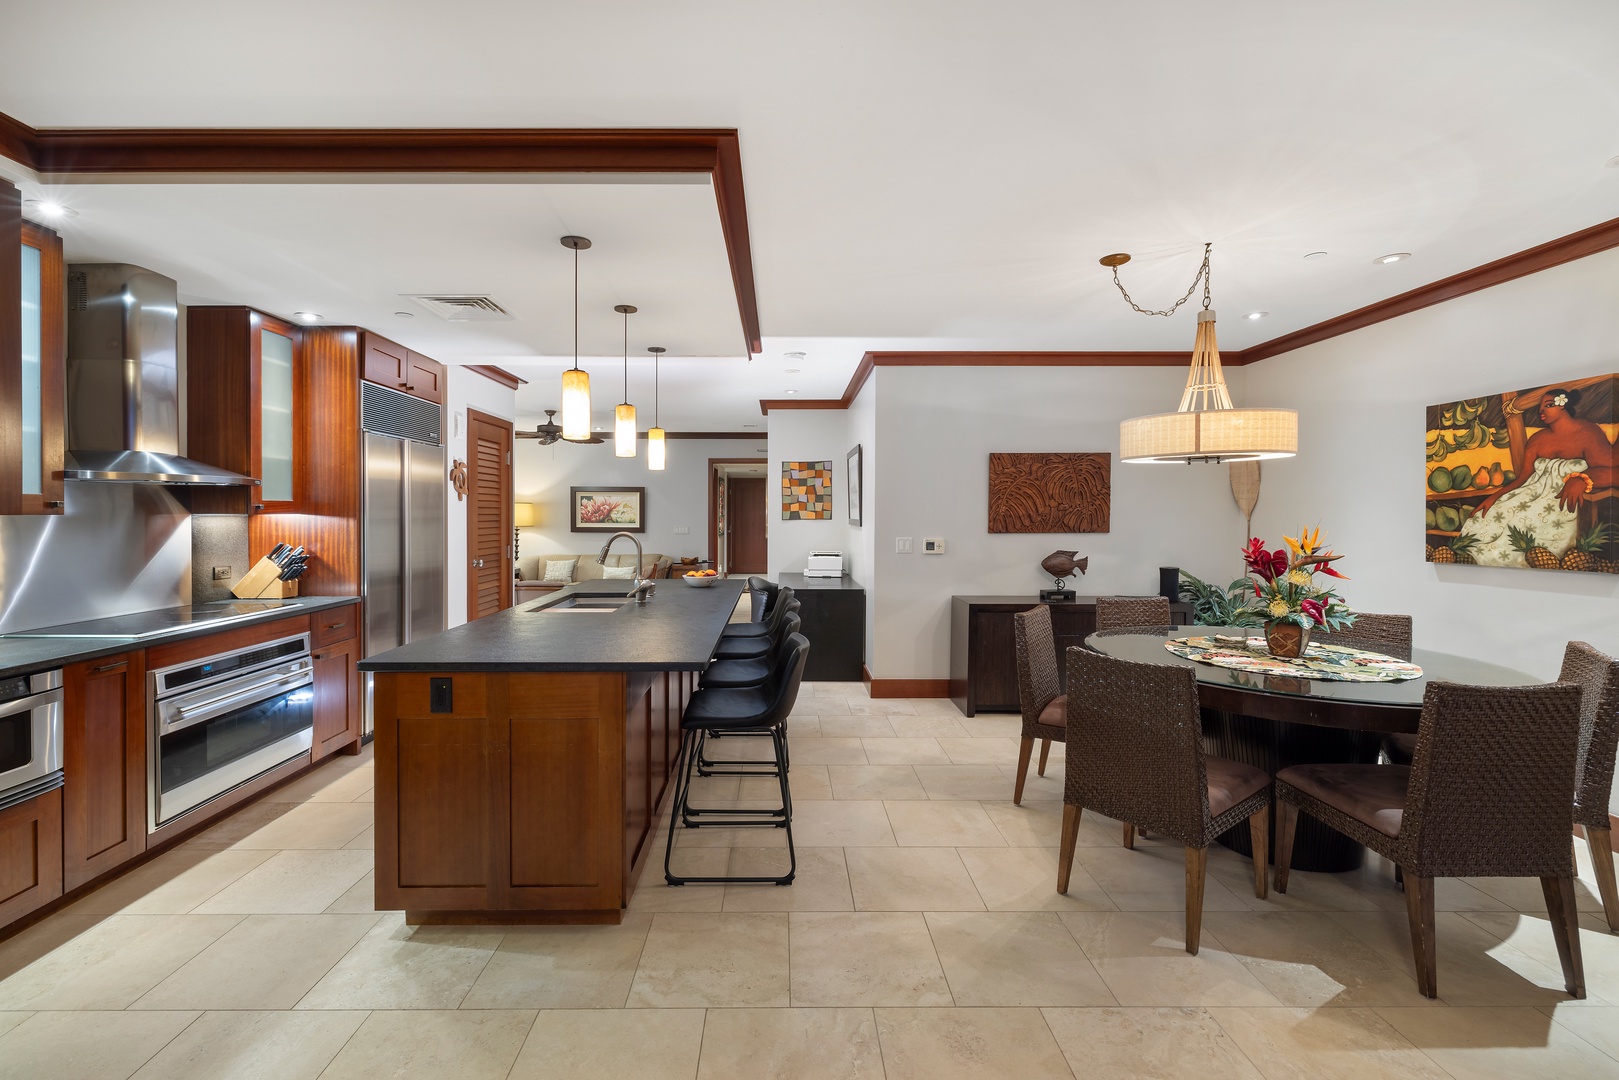 Kapolei Vacation Rentals, Ko Olina Beach Villas O1402 - Spacious kitchen with island and dining area, perfect for family gatherings.